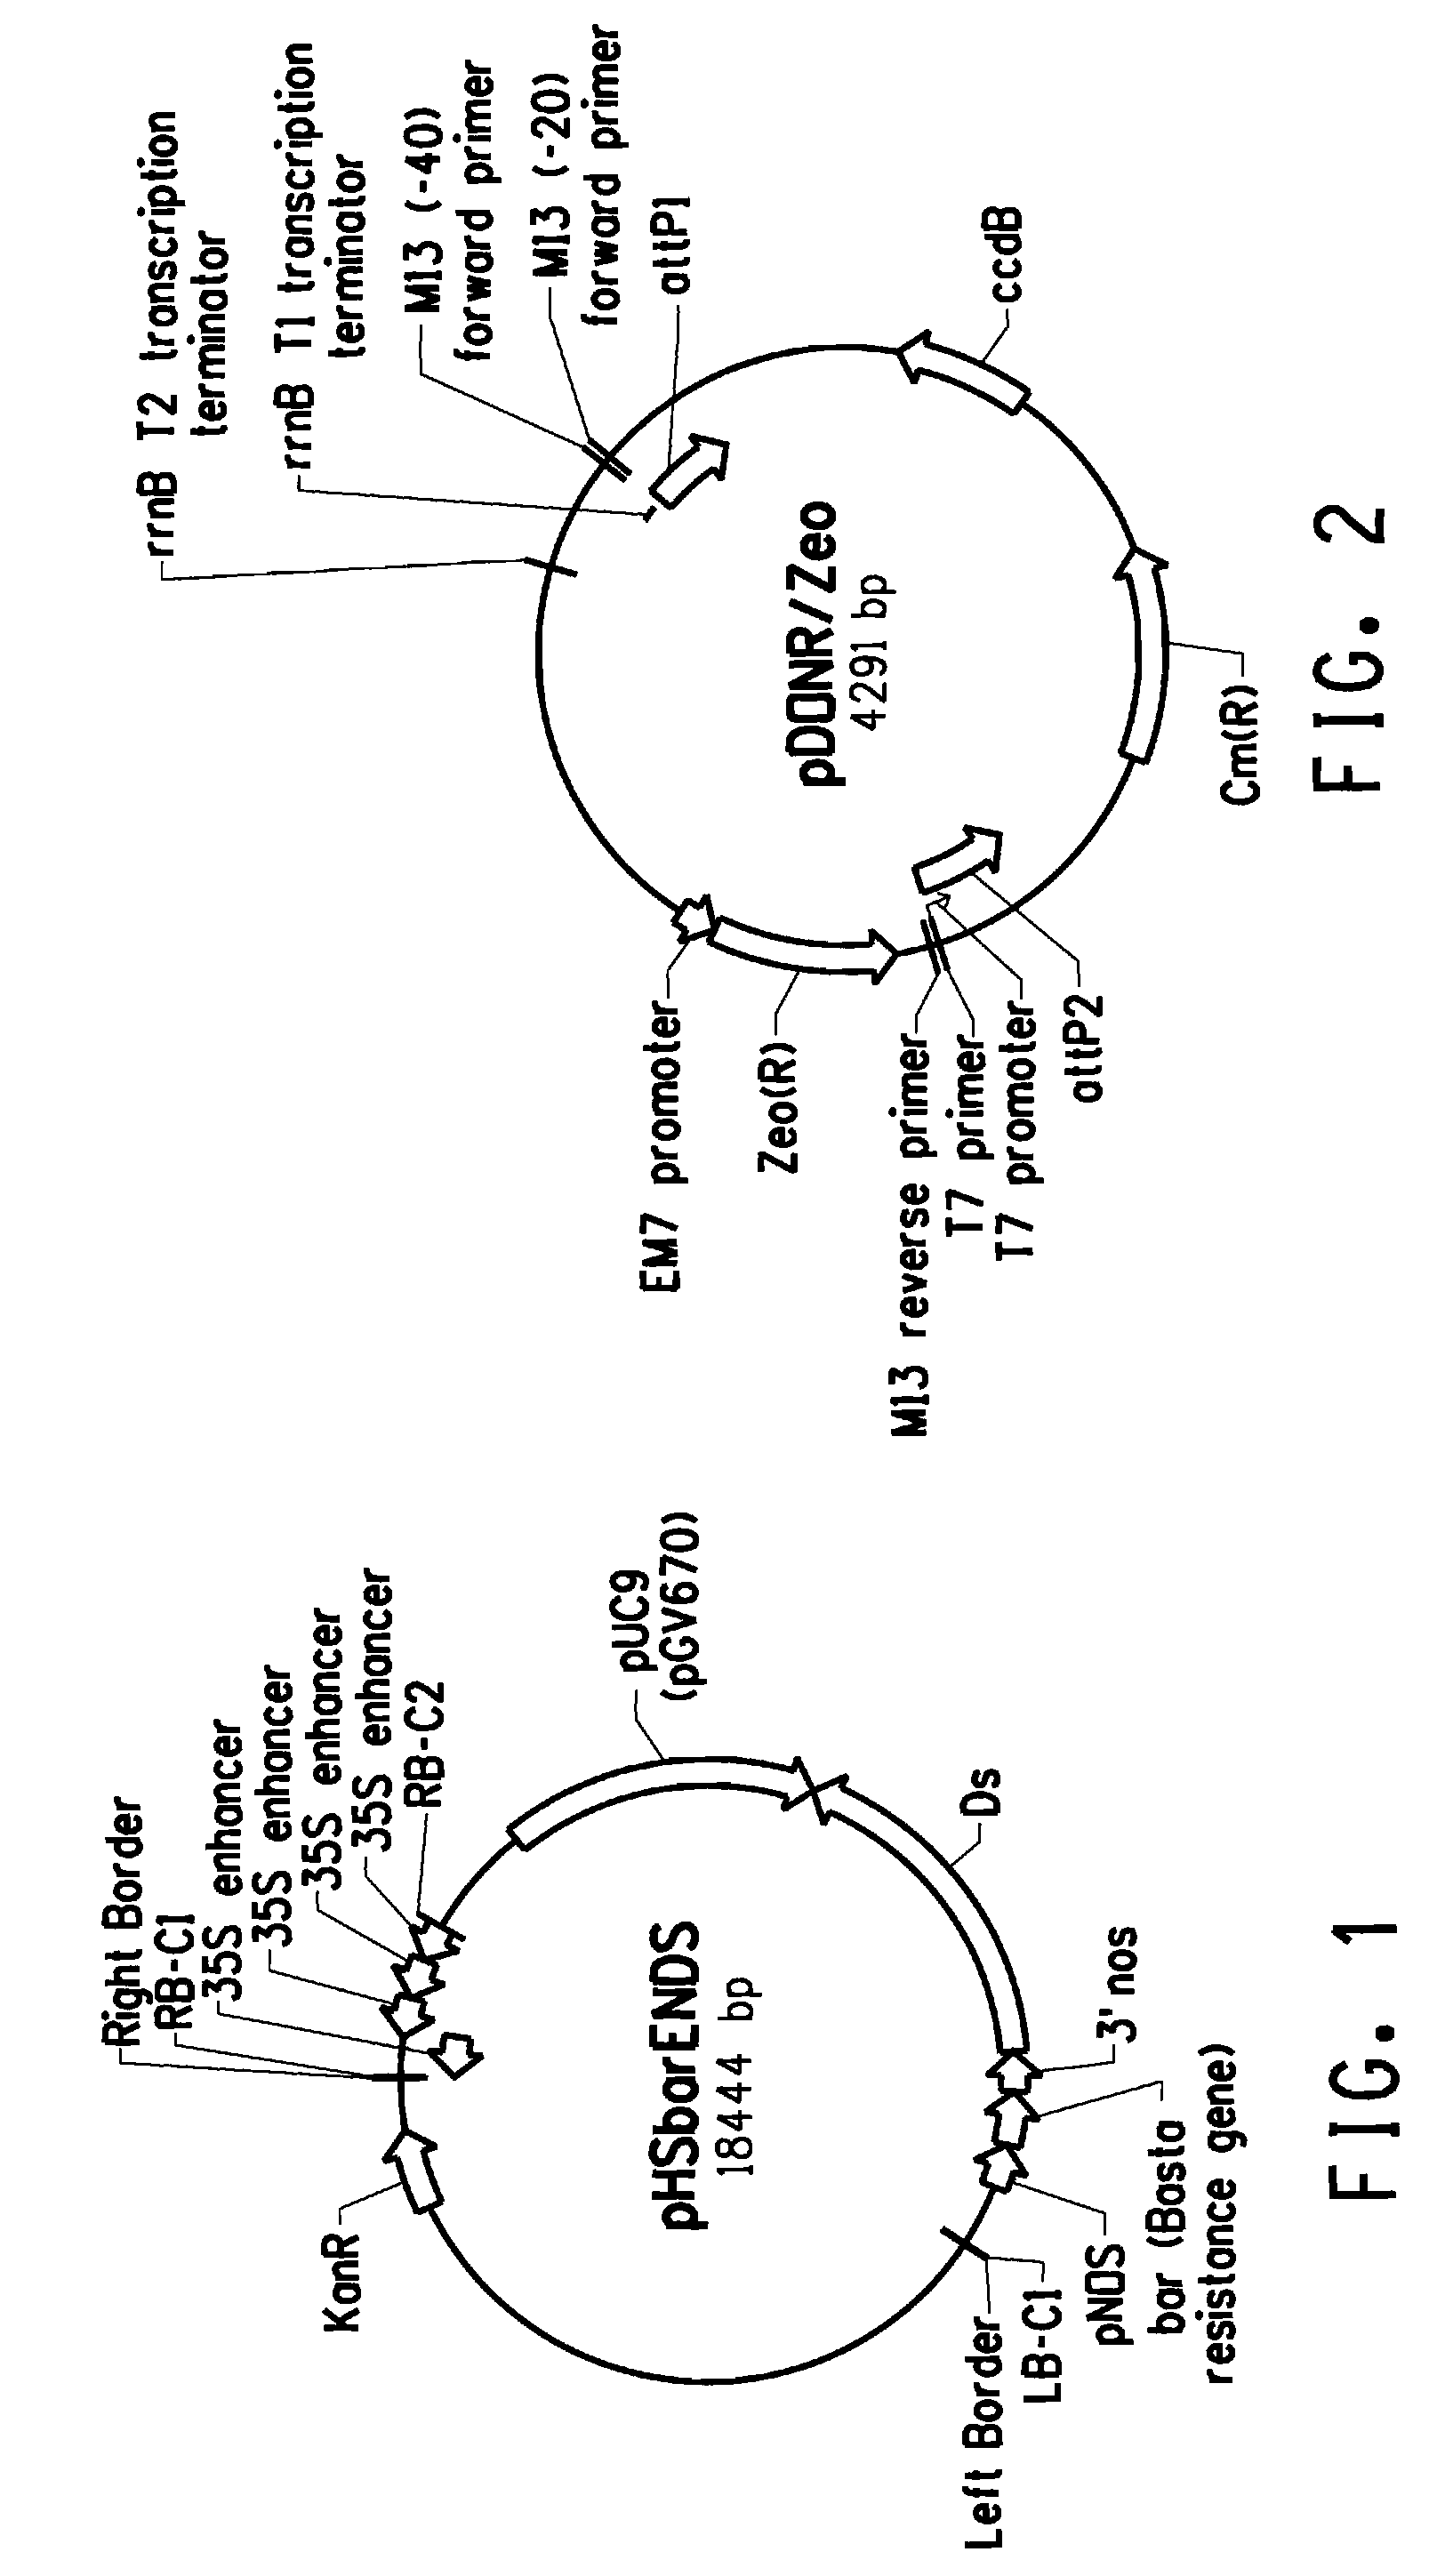 Plants with altered root architecture, related constructs and methods involving genes encoding nucleoside diphosphatase kinase (NDK) polypeptides and homologs thereof